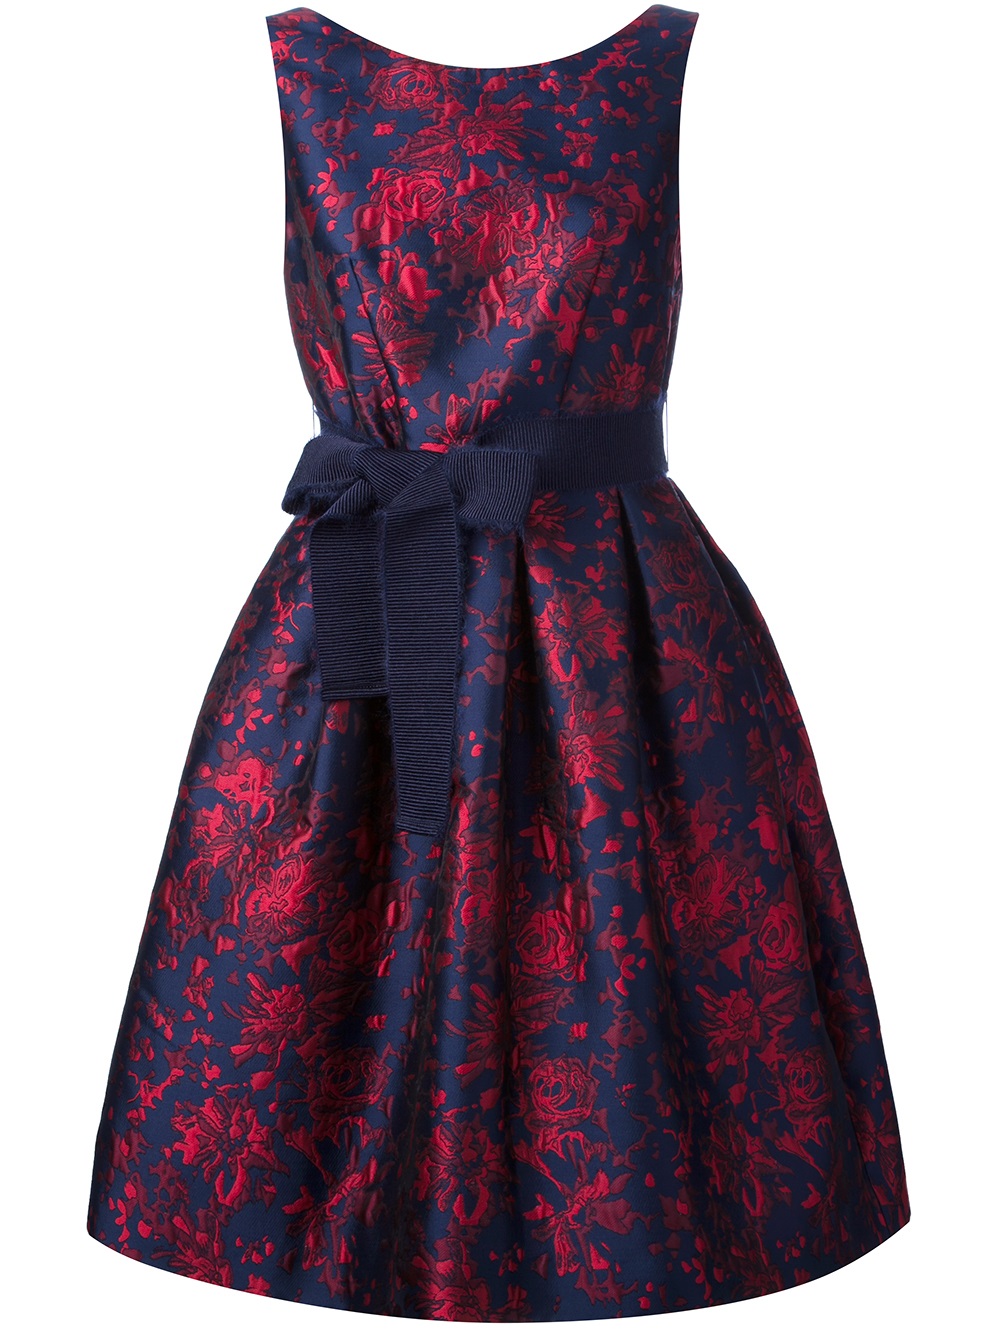 Lyst - P.A.R.O.S.H. Floral Brocade Sleeveless Dress in Blue